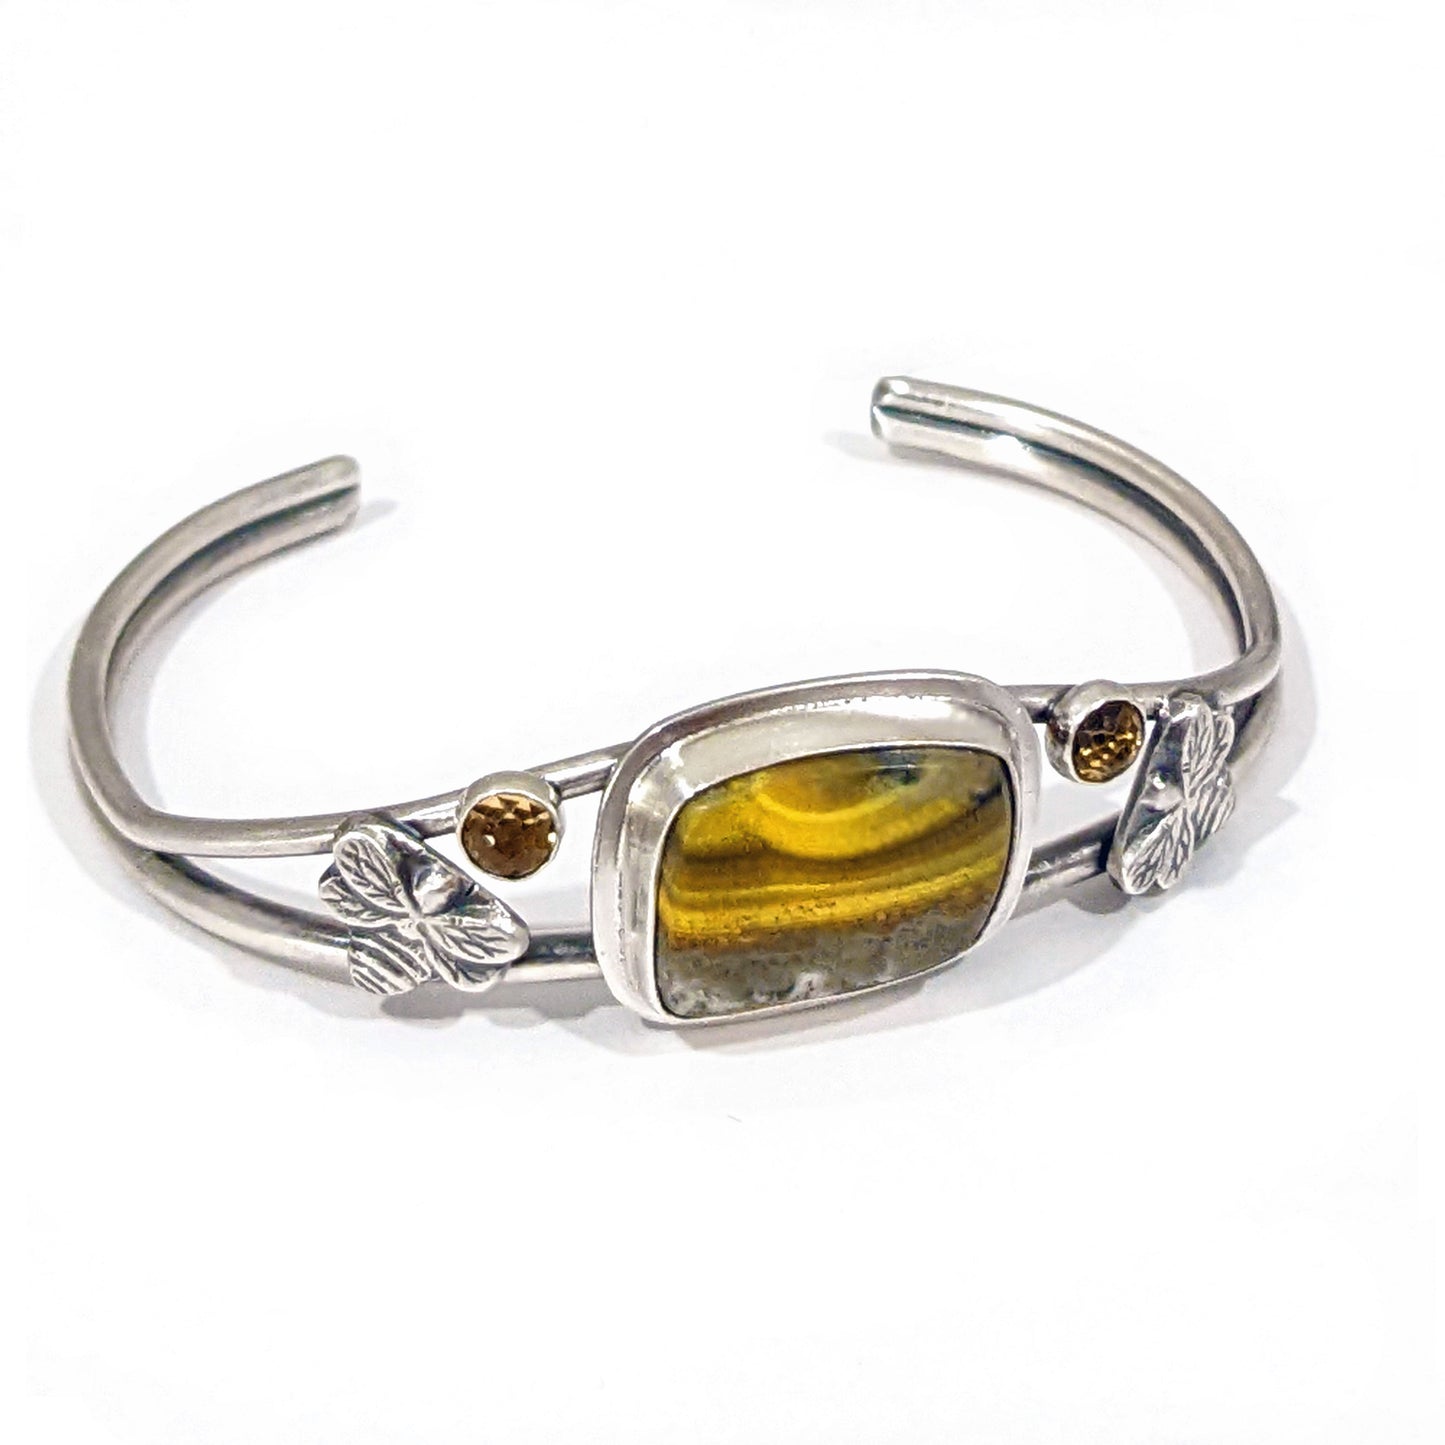 Alternate view of Sterling Silver Bumblebee Jasper cuff bracelet with two sterling silver bees and two rose cut citrine gemstones